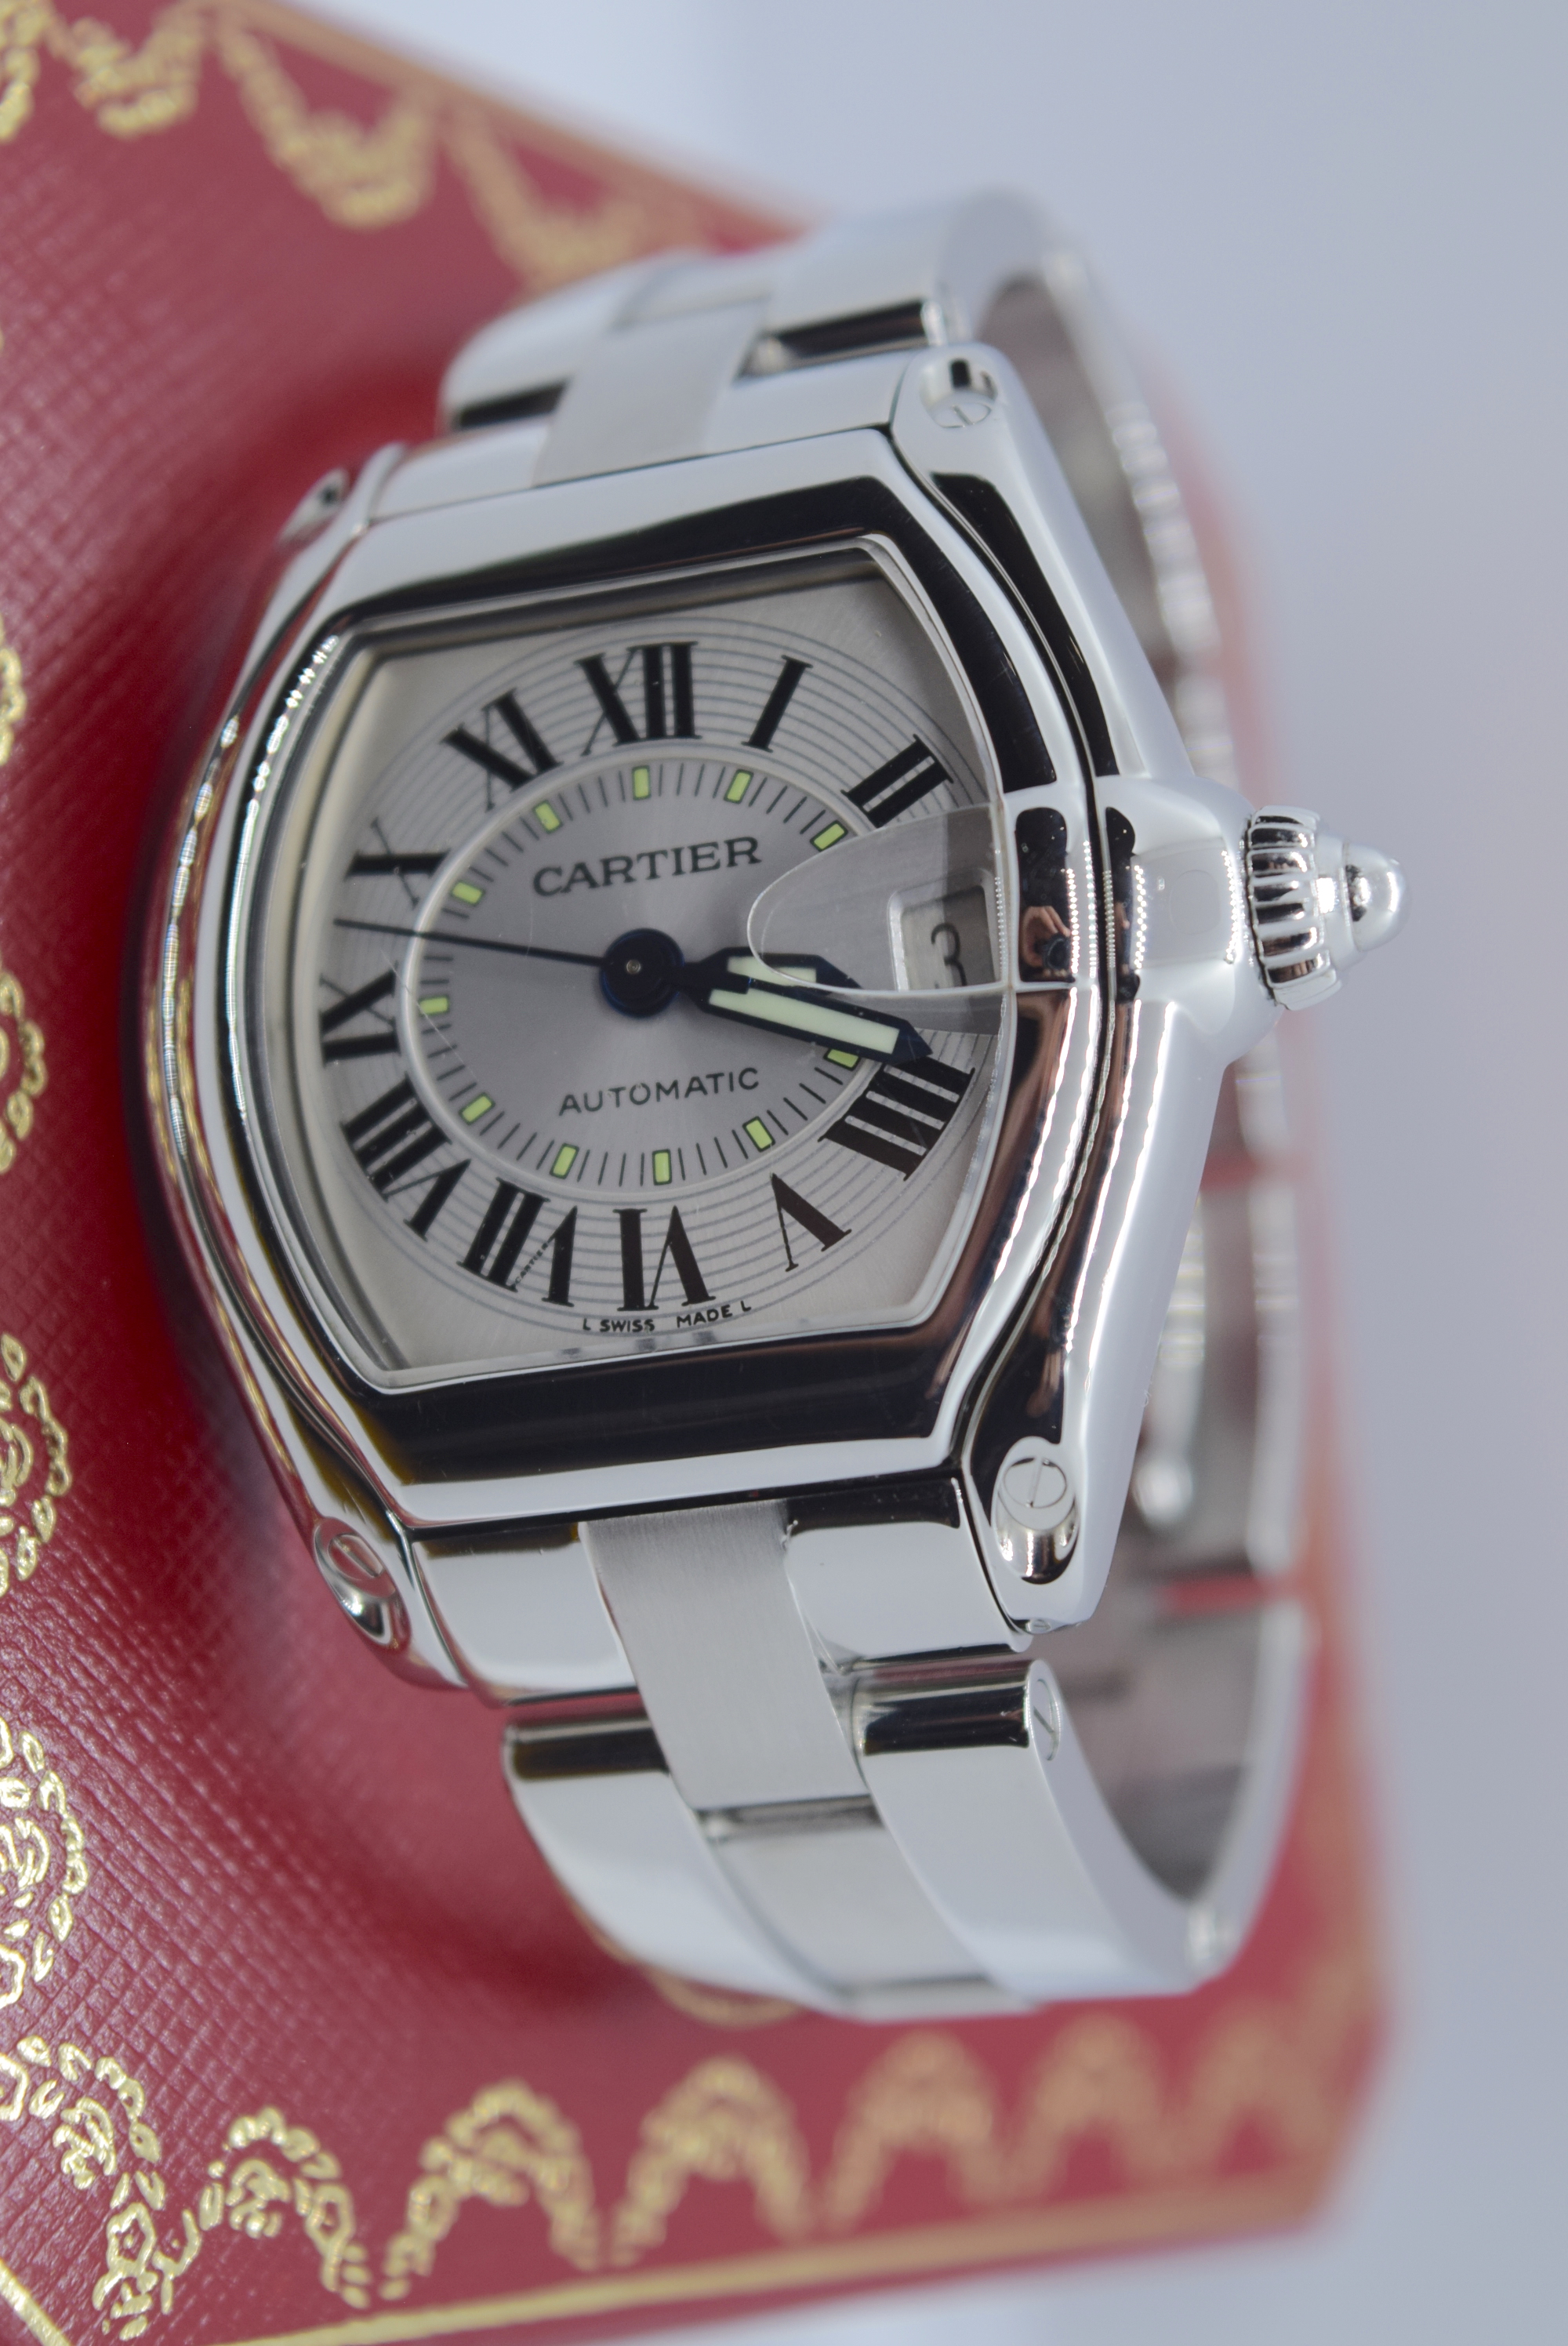 CARTIER ROADSTER REF. 2510 (AUTOMATIC) - SILVER DIAL - Image 2 of 6